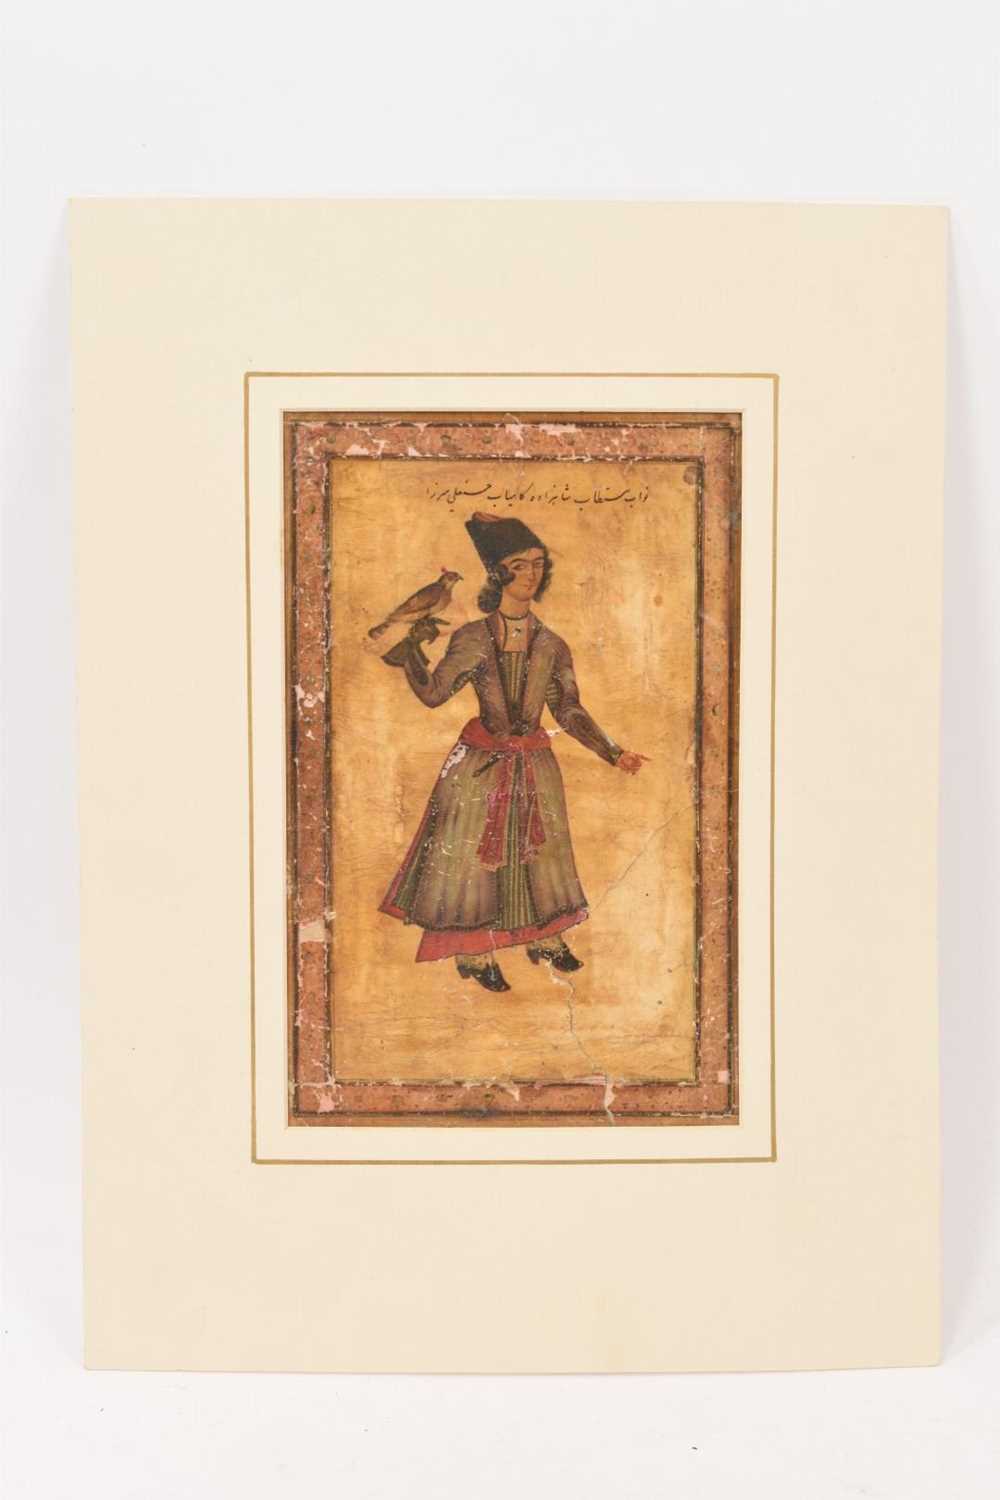 18th / 19th century Persian gouache of a Qatar Prince - Image 2 of 3